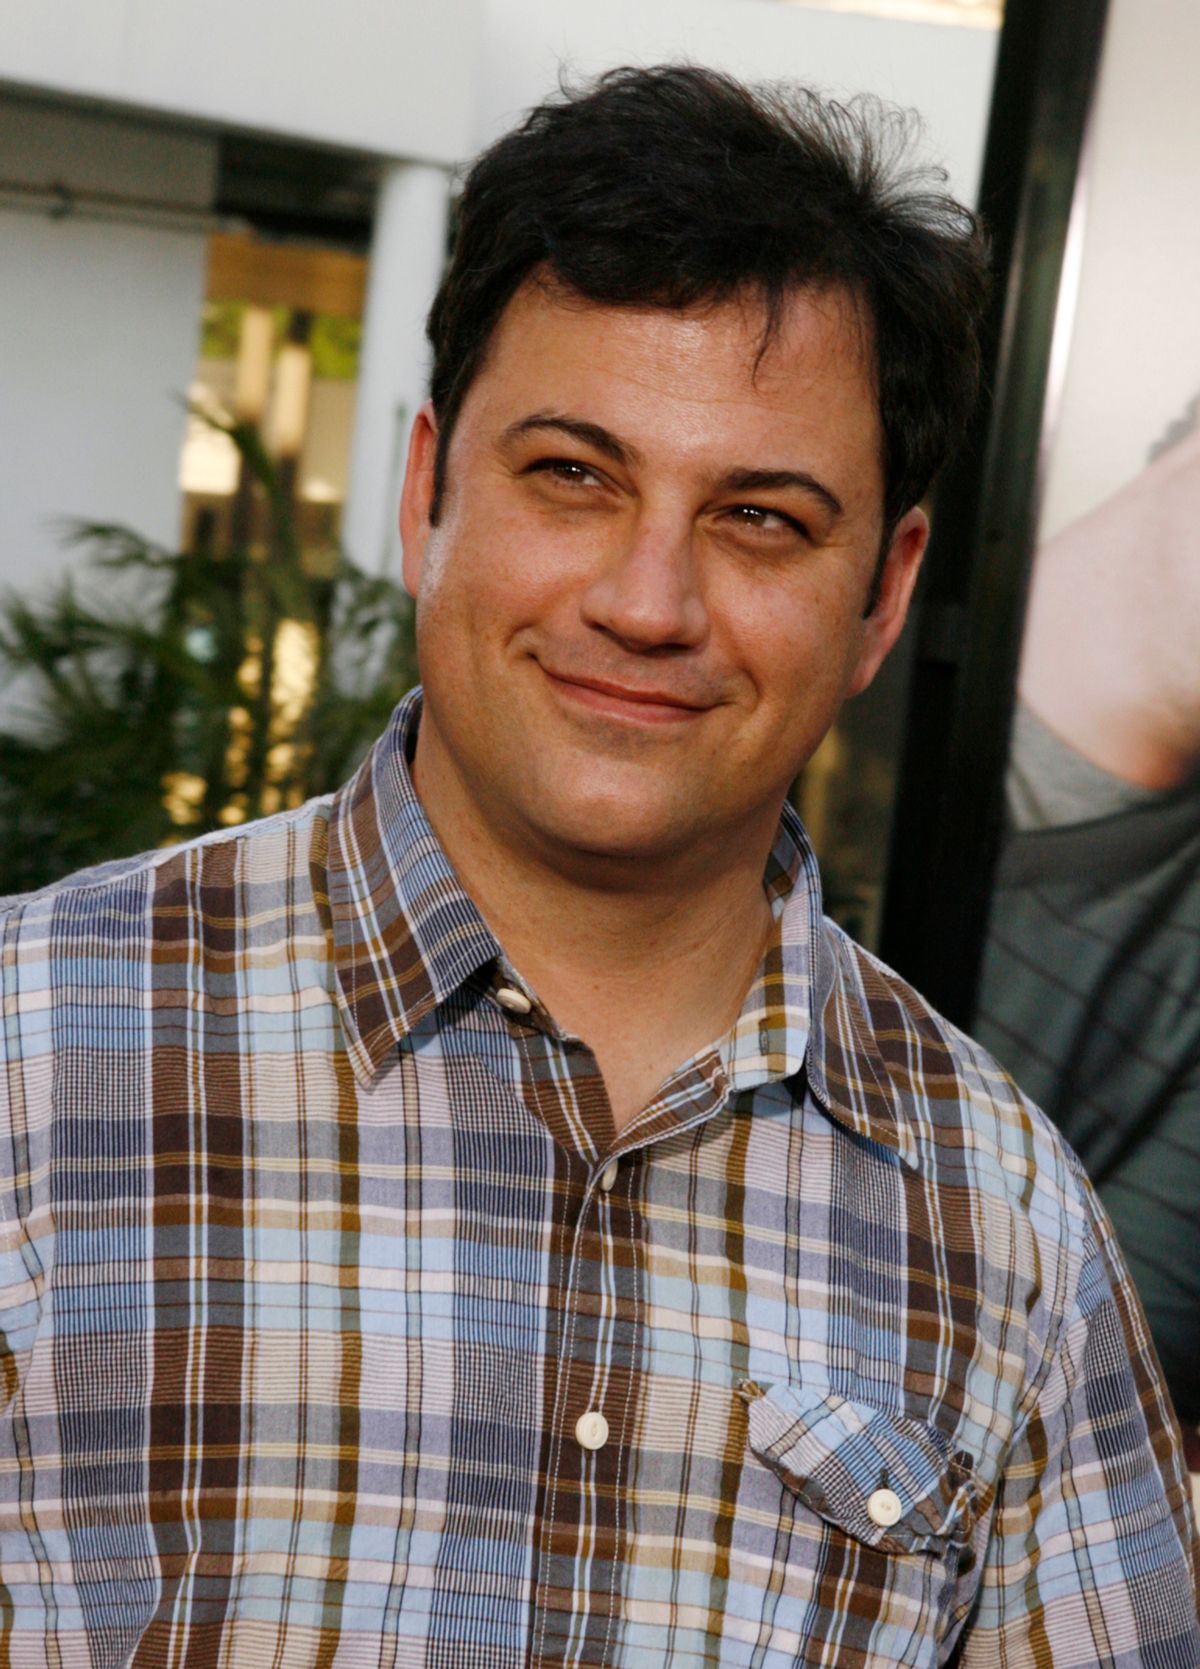 Talk show host Jimmy Kimmel arrives as a guest at the premiere of the new comedy film "Funny People" in Hollywood July 20, 2009. REUTERS/Fred Prouser (UNITED STATES ENTERTAINMENT HEADSHOT)  (Â© Fred Prouser / Reuters)